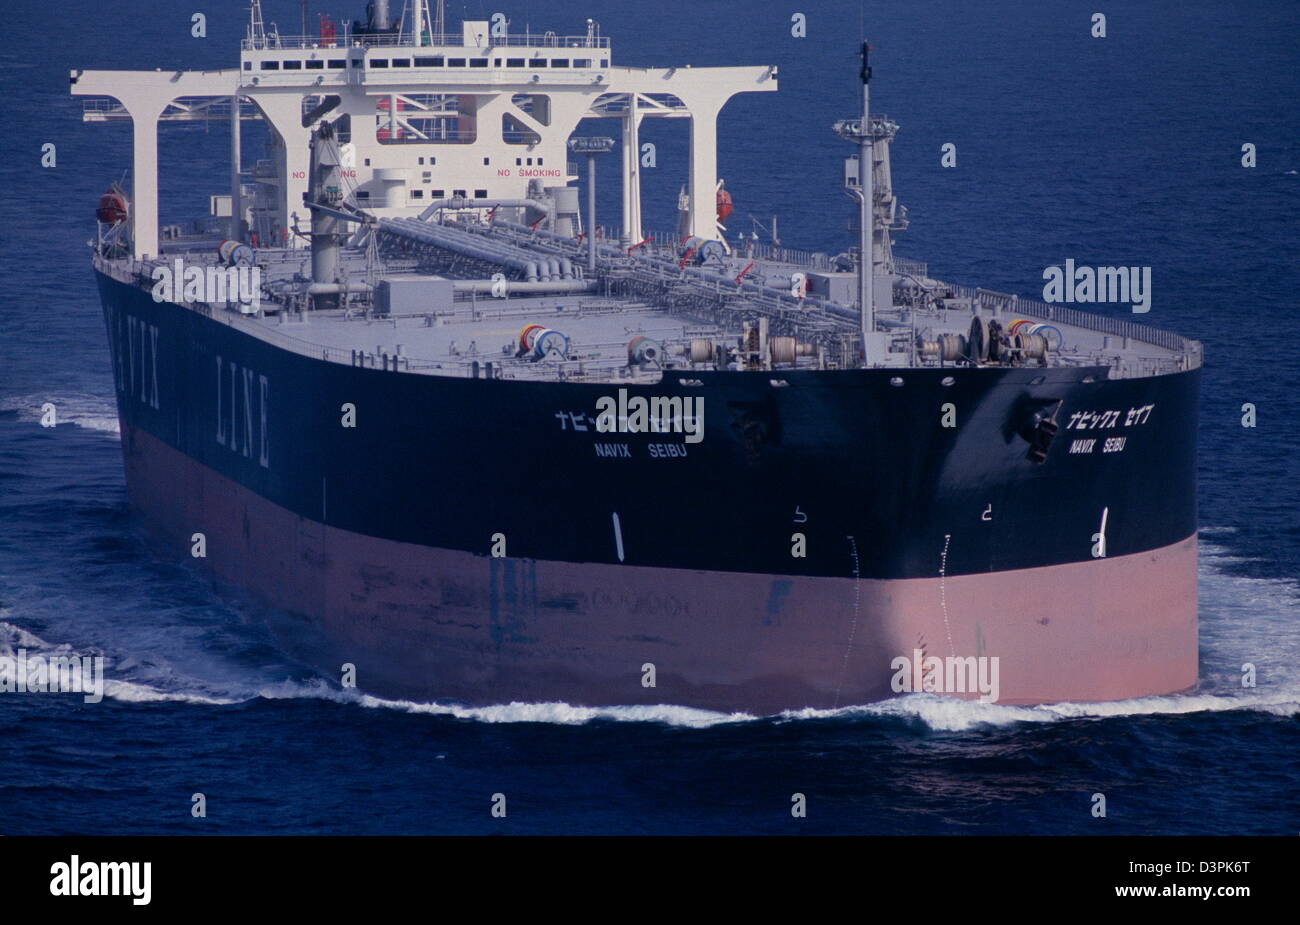 The oil supertanker Navix Seibu of the Navix Line steaming up the Persian Gulf, just off the Straits of Hormuz in the Indian Oce Stock Photo